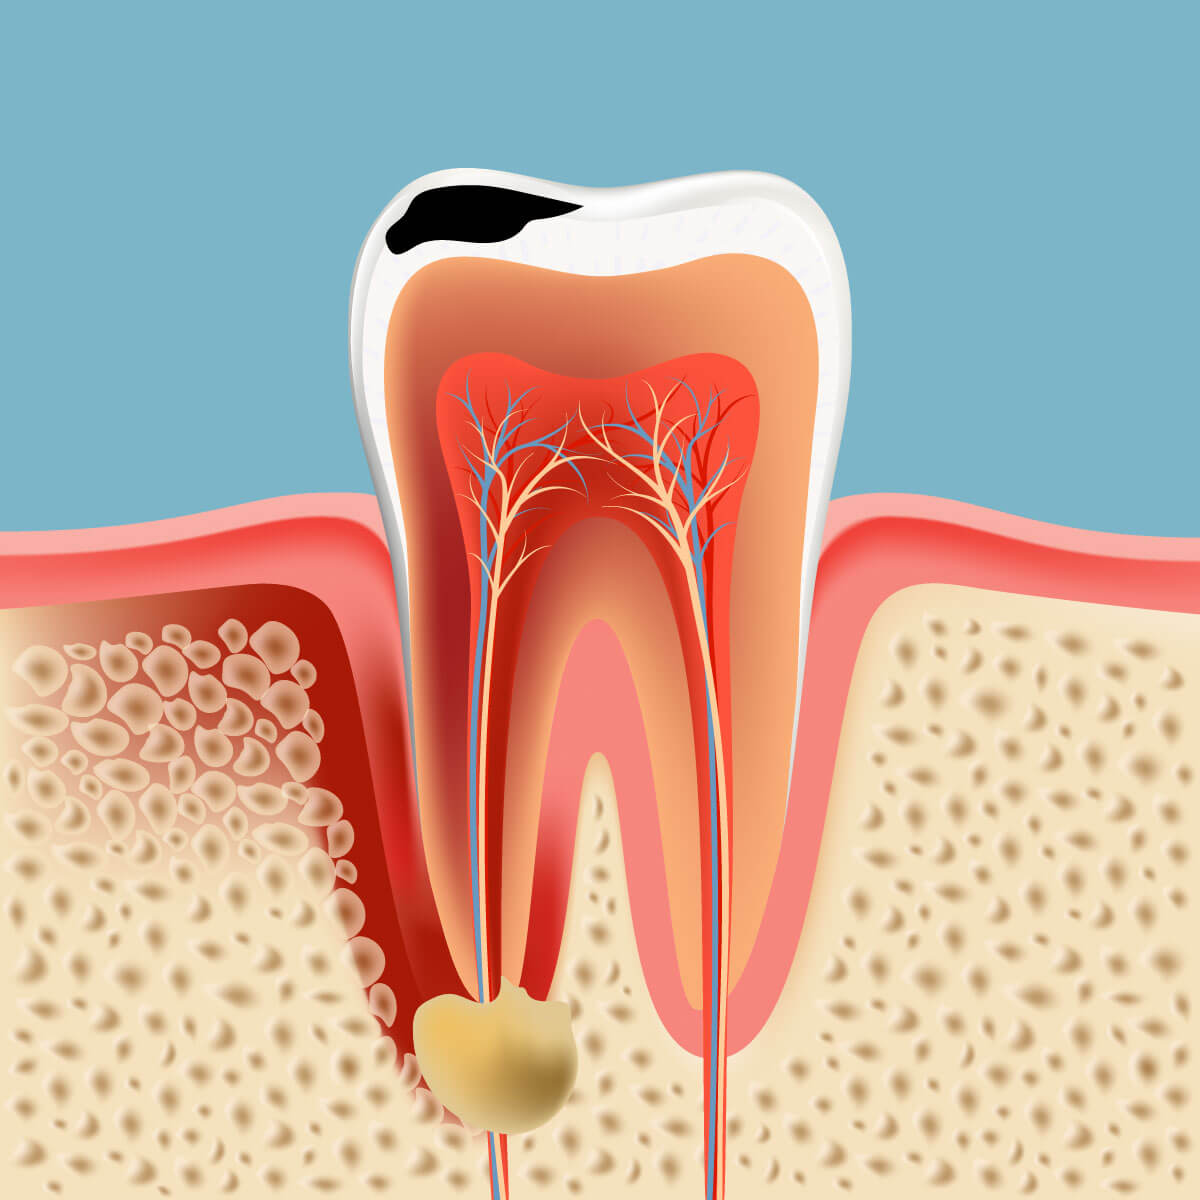 Root canal treatment in Orange ca